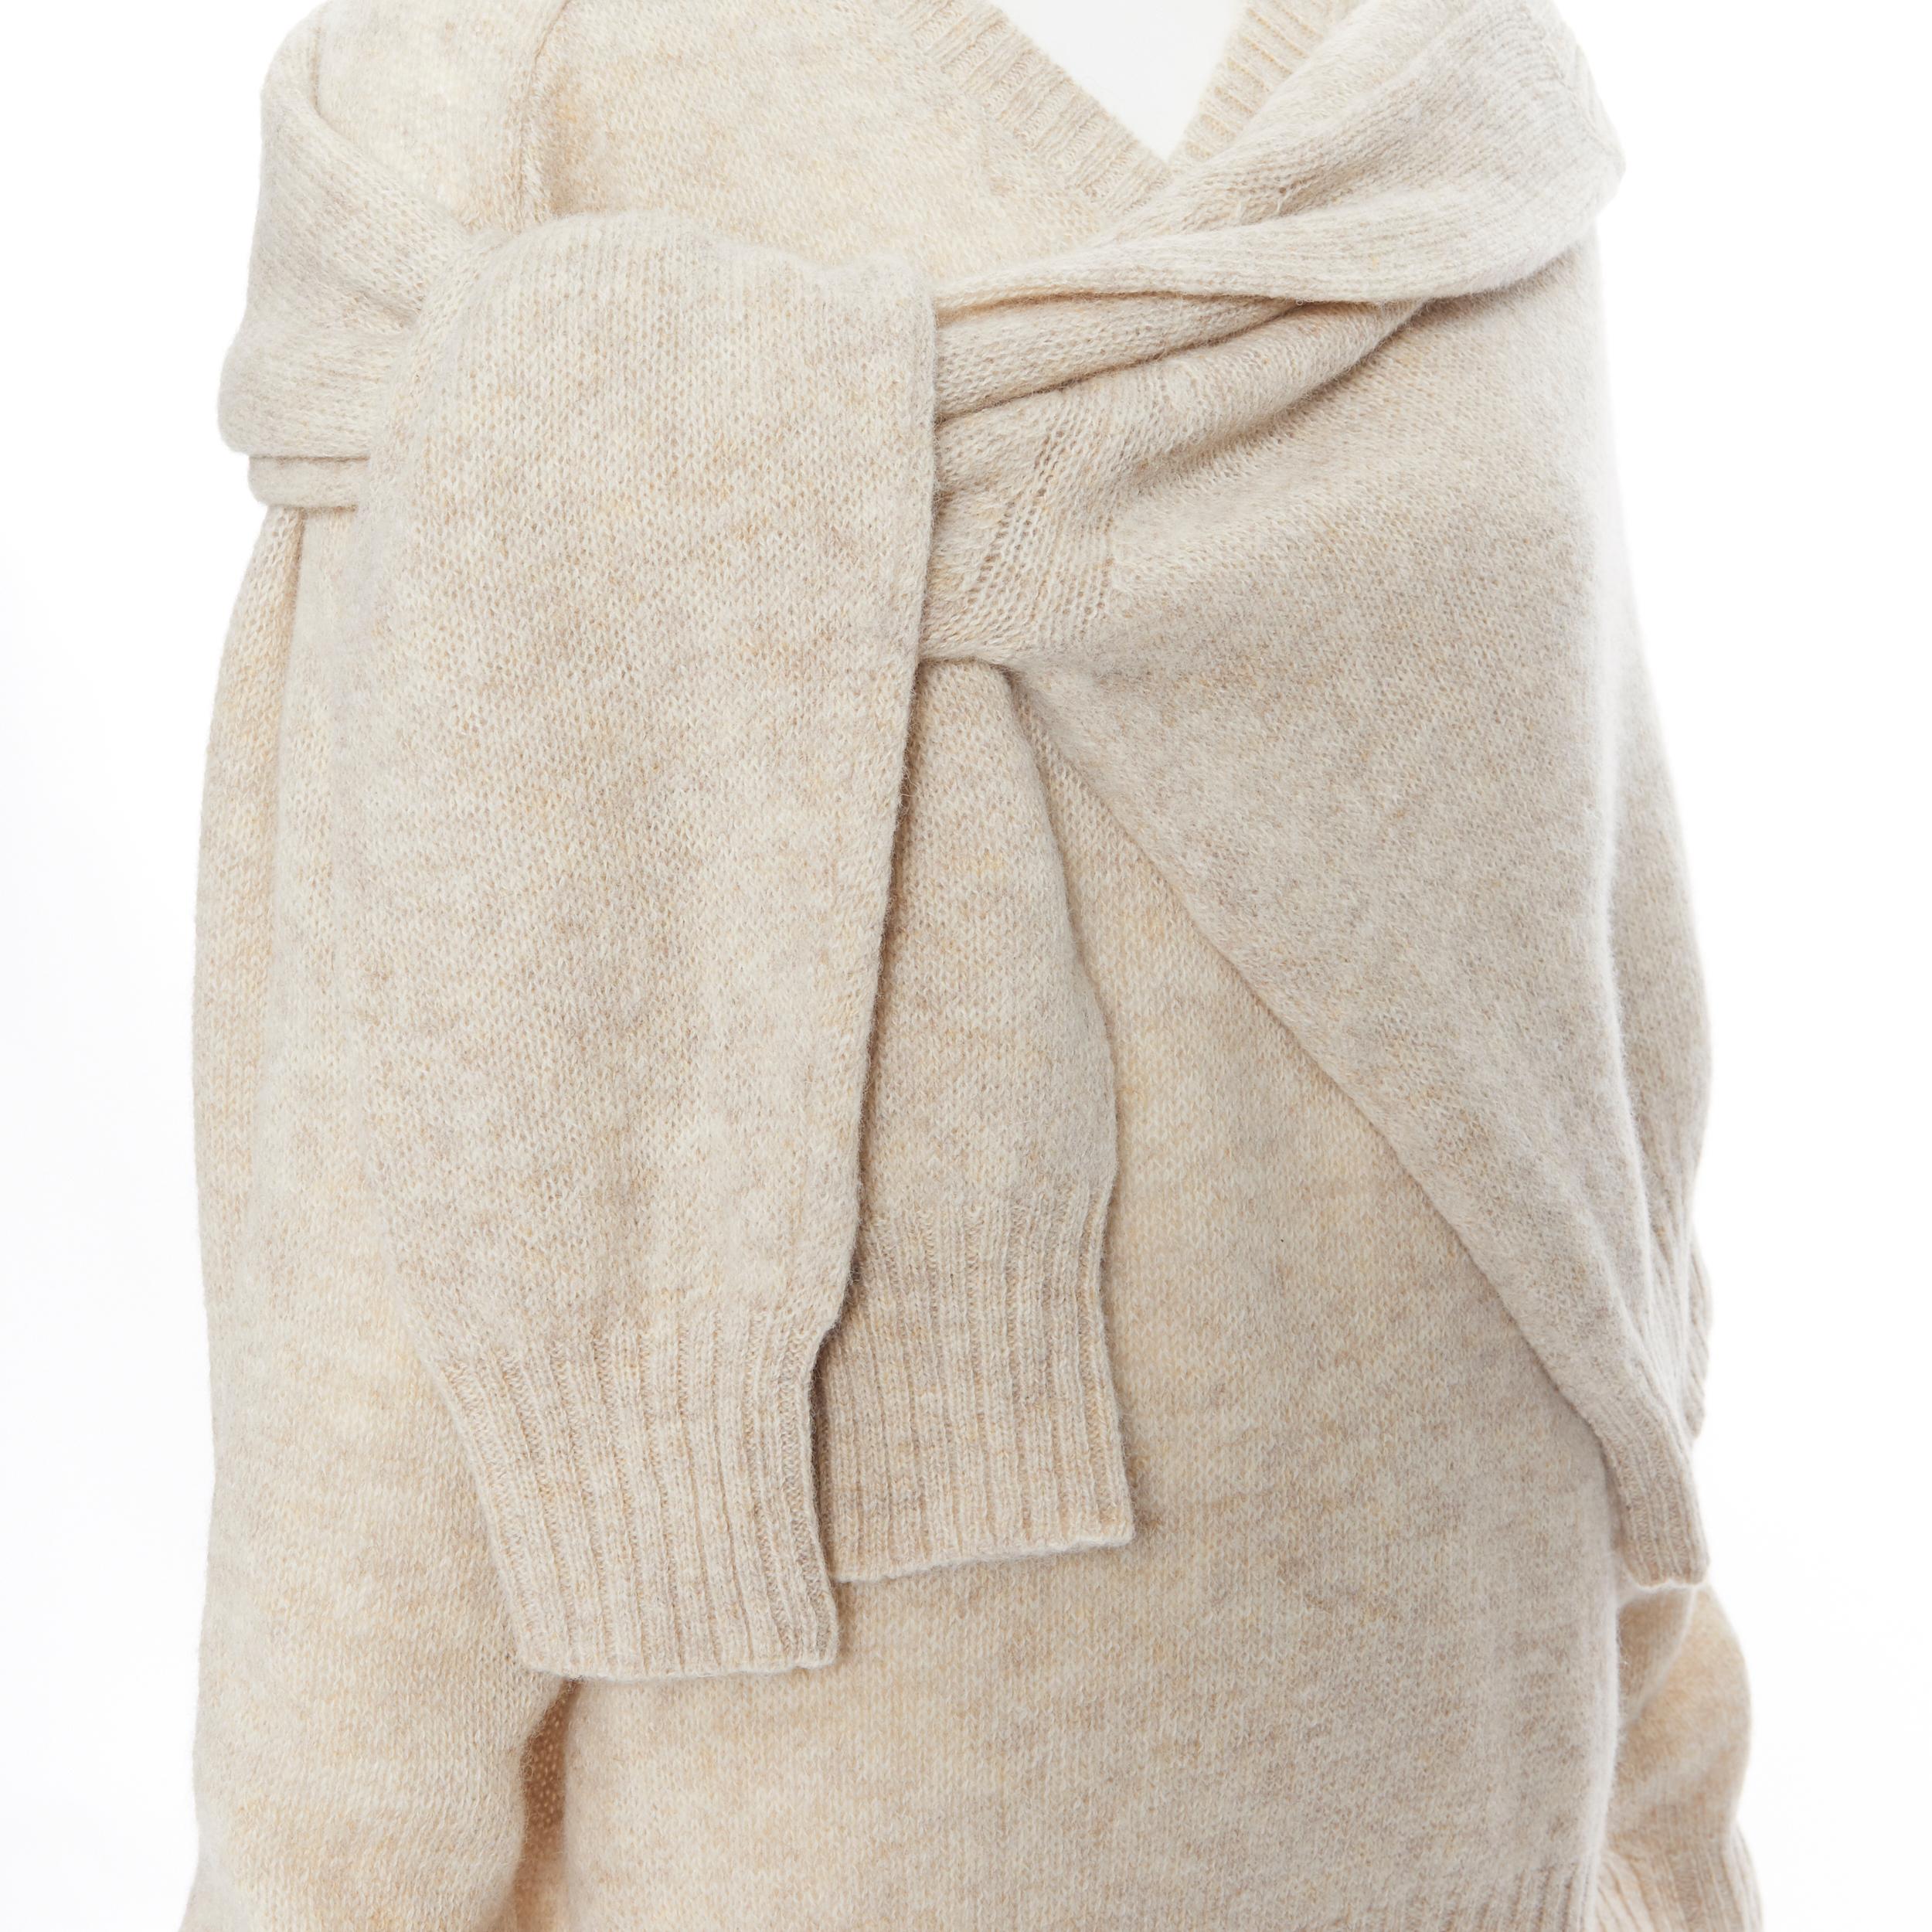 runway OLD CELINE PHOEBE PHILO beige wool attached wrap oversized sweater XS
Brand: Celine
Designer: Phoebe Philo
Model Name / Style: Sweater
Material: Wool
Color: Beige
Pattern: Solid
Extra Detail: Iconic style. Two sweaters attached at shoulder.